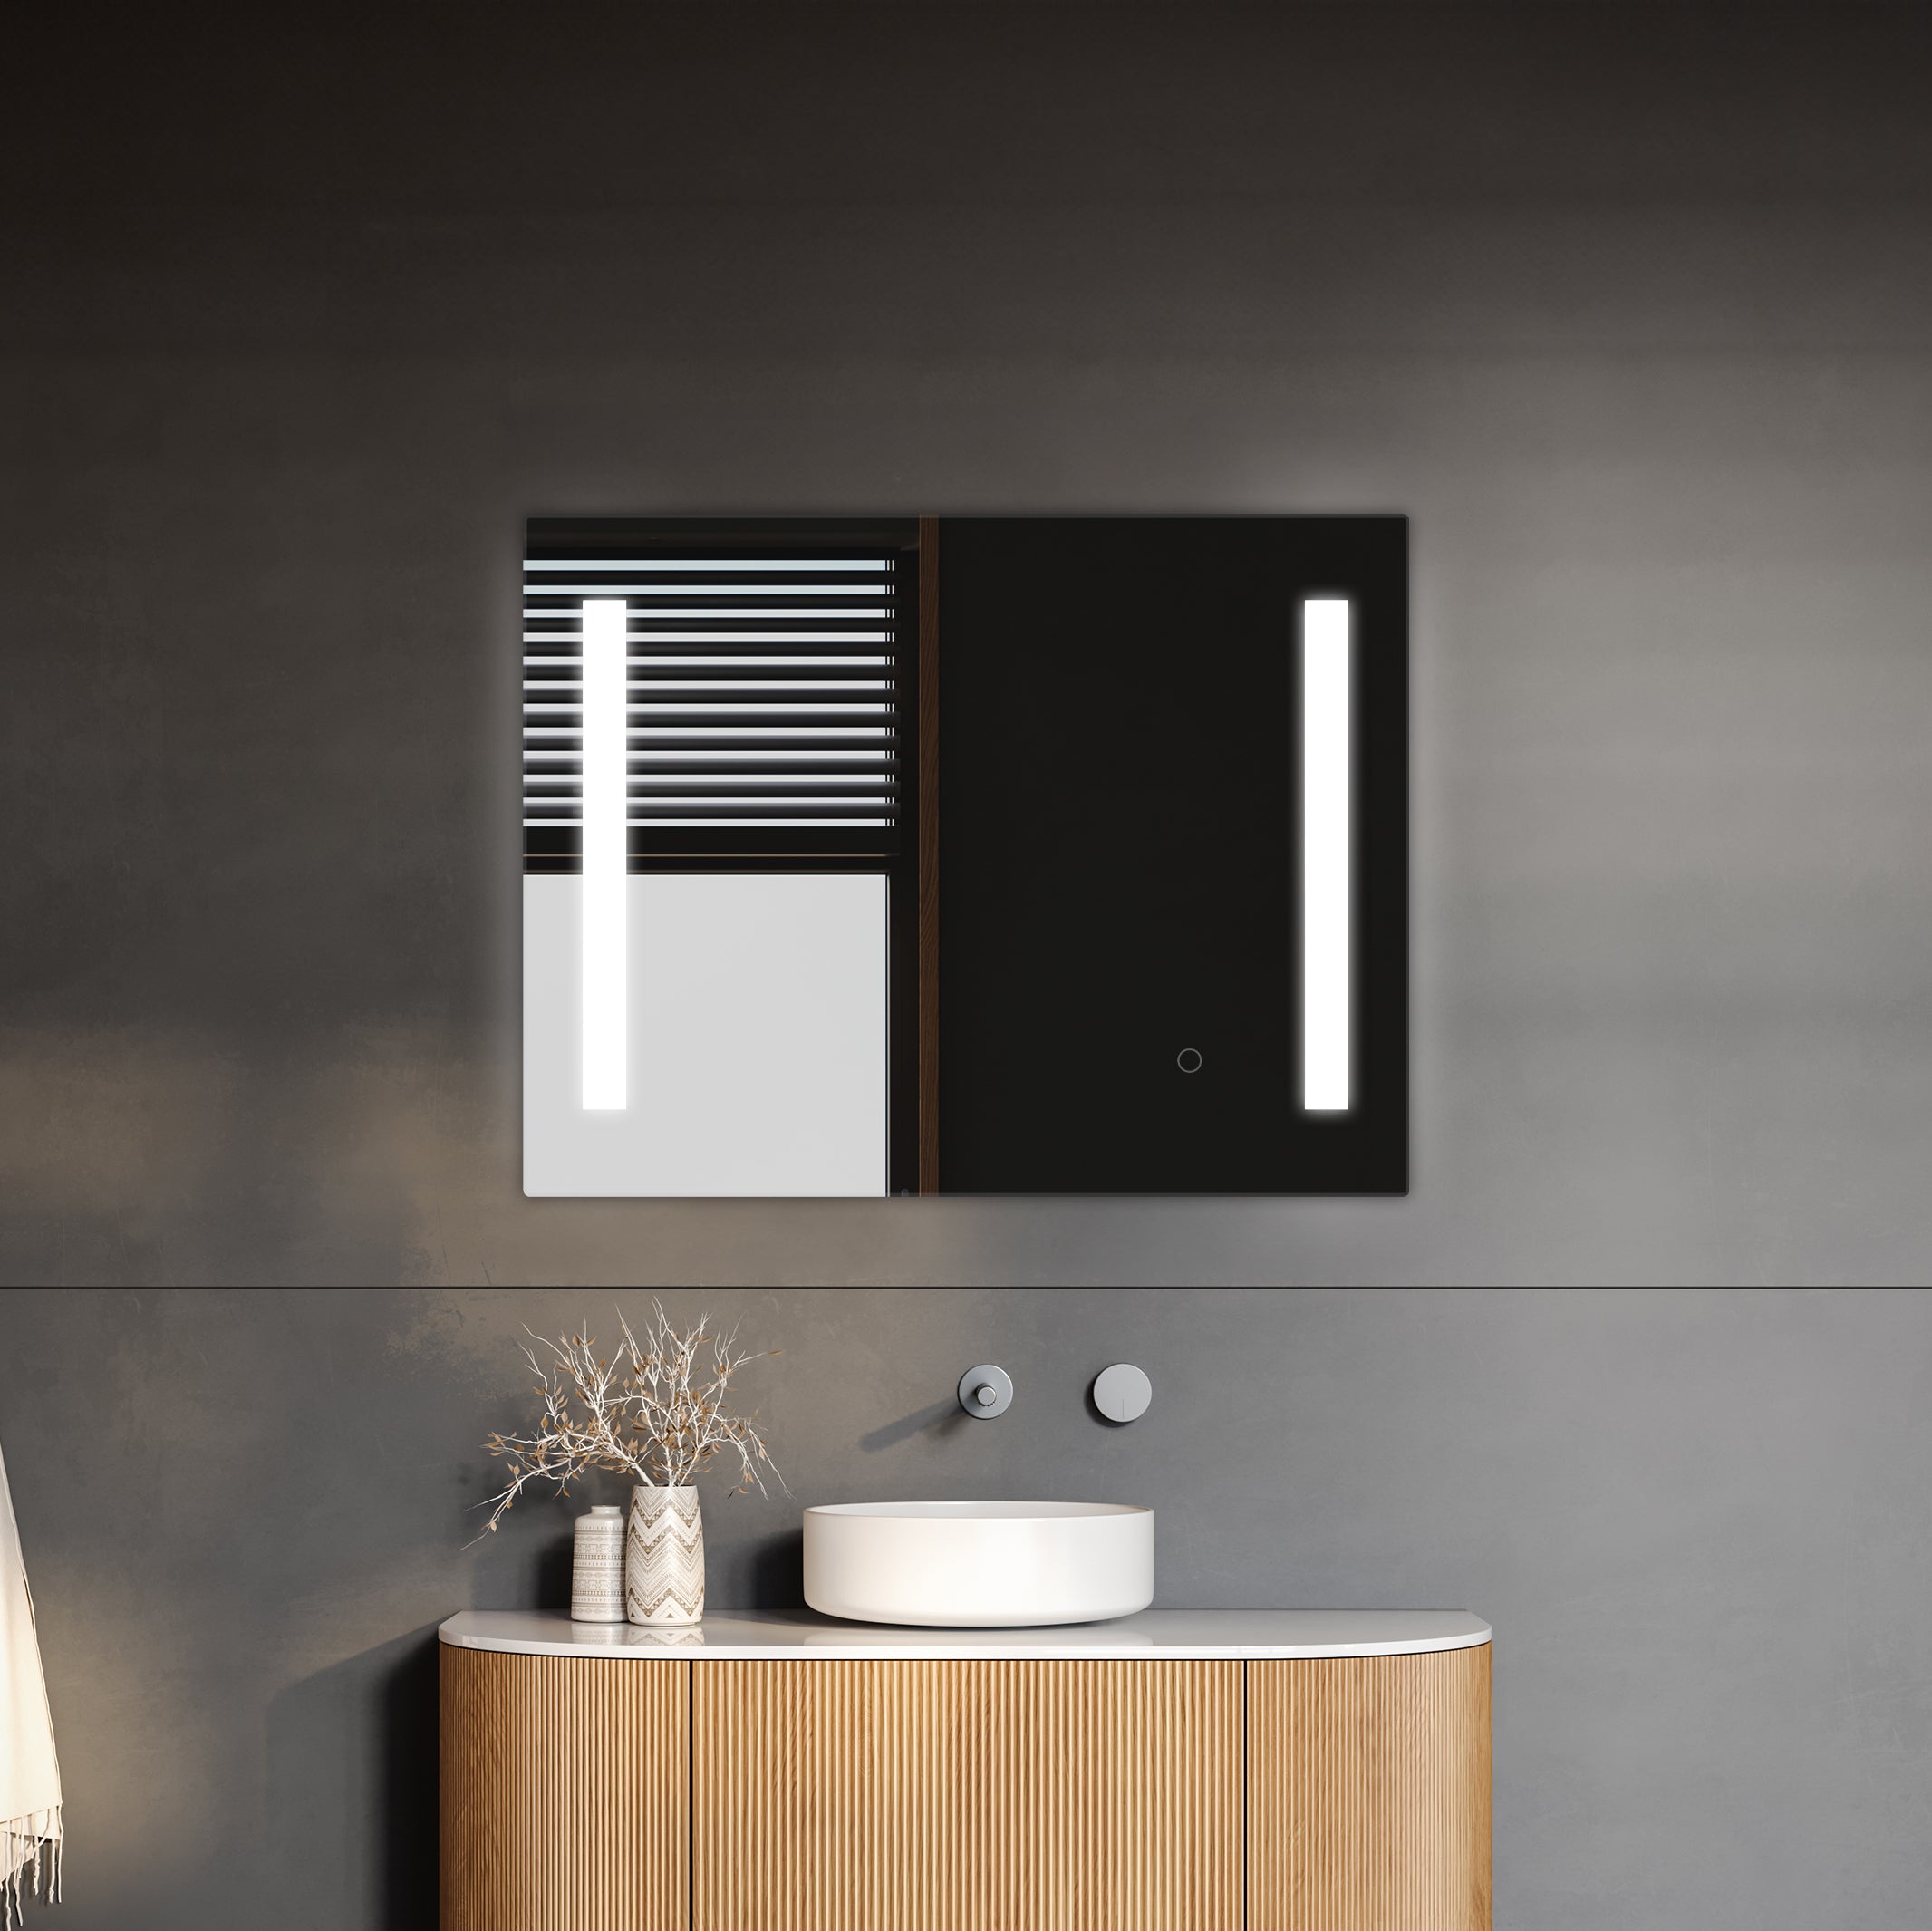 Minimalist bathroom interior with a modern, symmetrically designed vanity against a textured gray wall, highlighted by sleek, rectangular TREVISO LED mirrors with an integrated defogger.